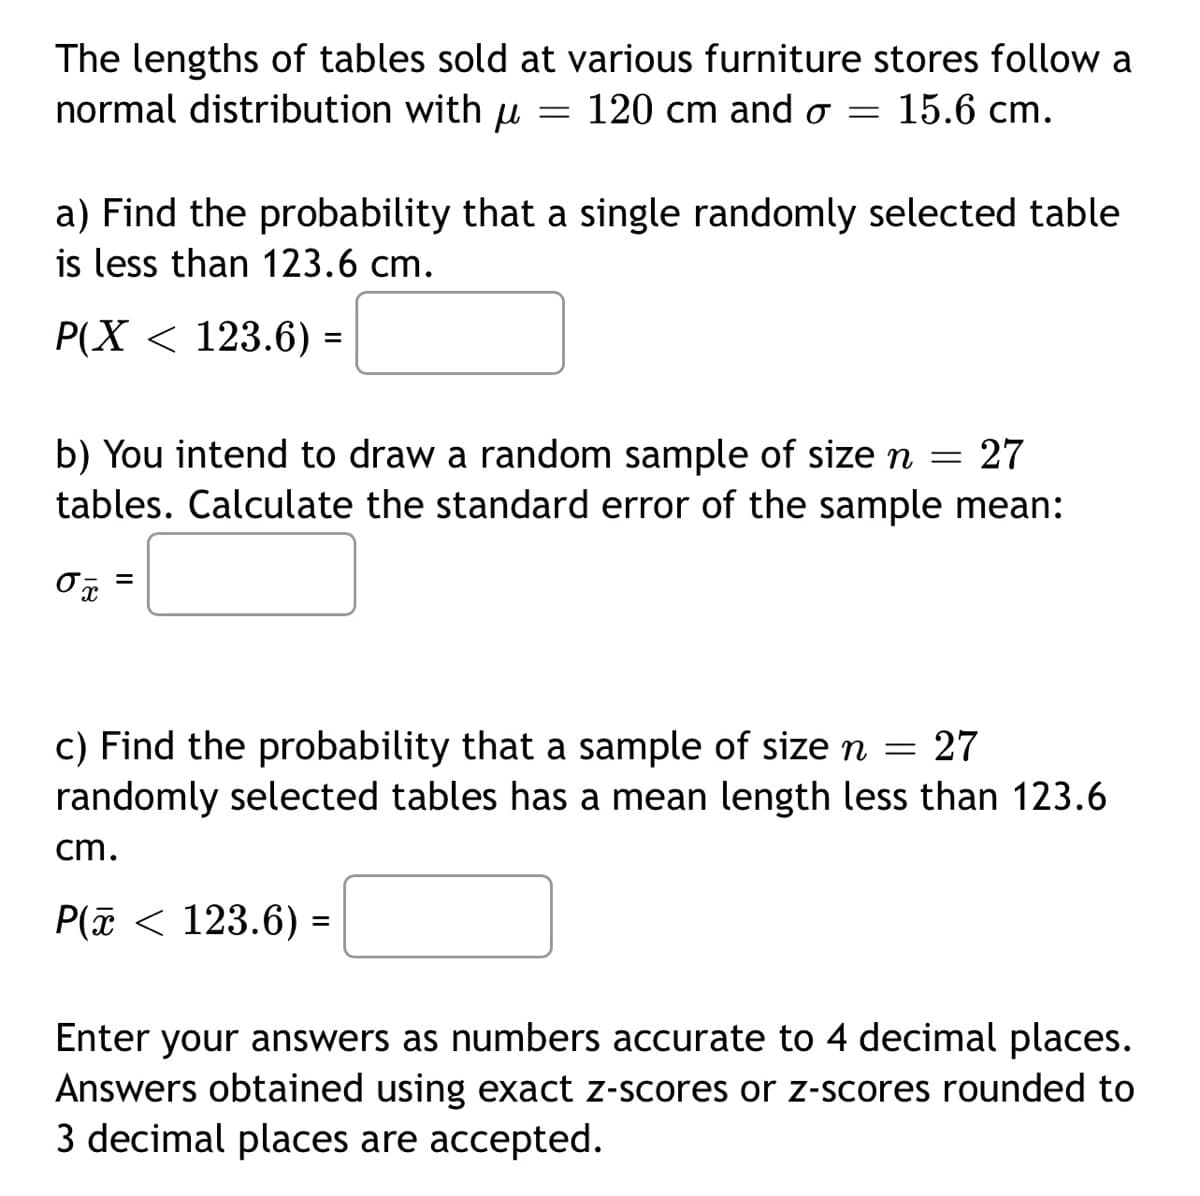 The lengths of tables sold at various furniture stores follow a
normal distribution with u =
120 cm and o= 15.6 cm.
a) Find the probability that a single randomly selected table
is less than 123.6 cm.
P(X < 123.6) =
b) You intend to draw a random sample of size n = 27
tables. Calculate the standard error of the sample mean:
0x =
c) Find the probability that a sample of size n = 27
randomly selected tables has a mean length less than 123.6
cm.
P(x< 123.6) =
Enter your answers as numbers accurate to 4 decimal places.
Answers obtained using exact z-scores or z-scores rounded to
3 decimal places are accepted.